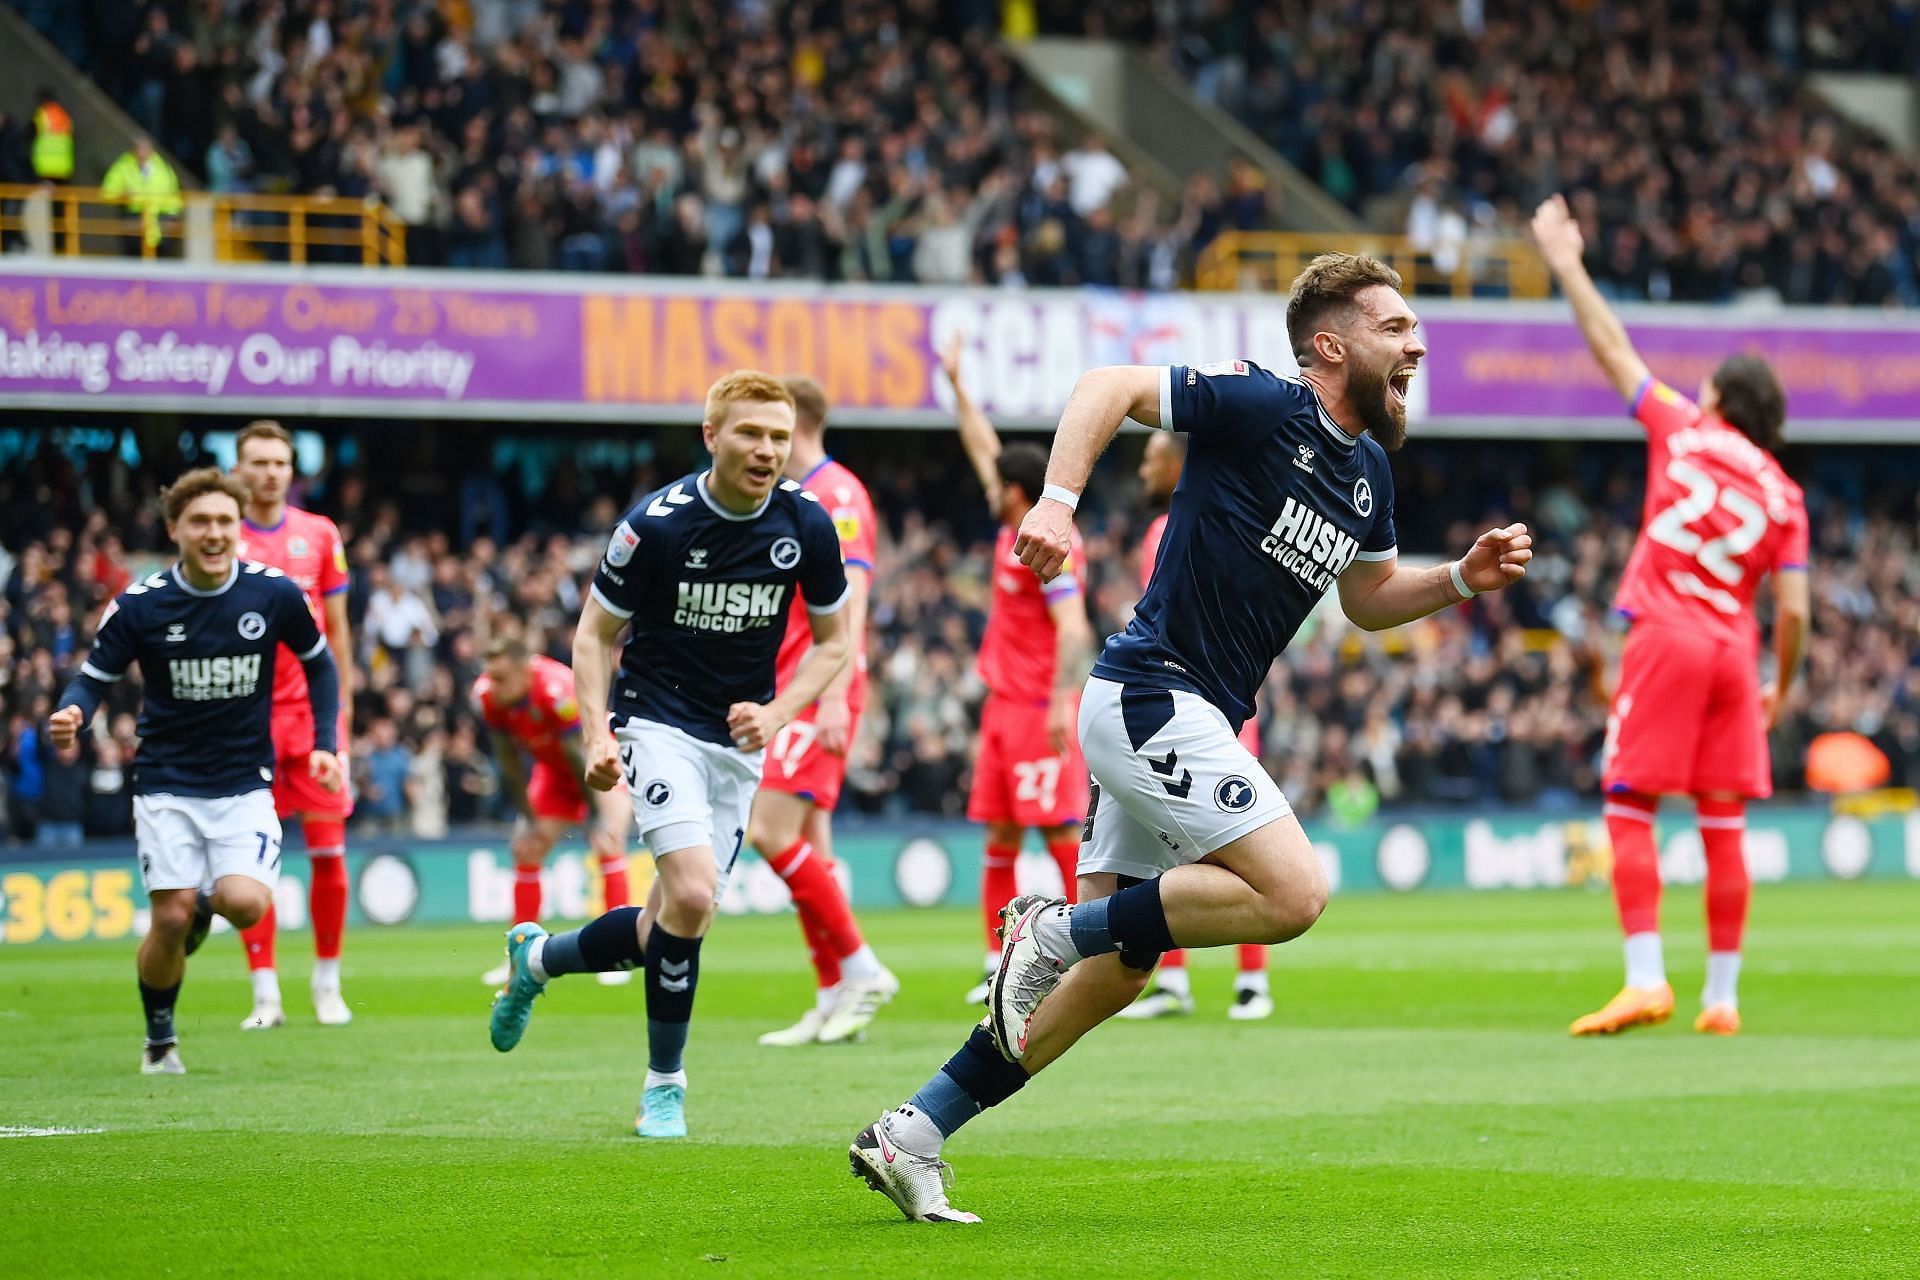 England - Millwall FC - Results, fixtures, squad, statistics, photos,  videos and news - Soccerway